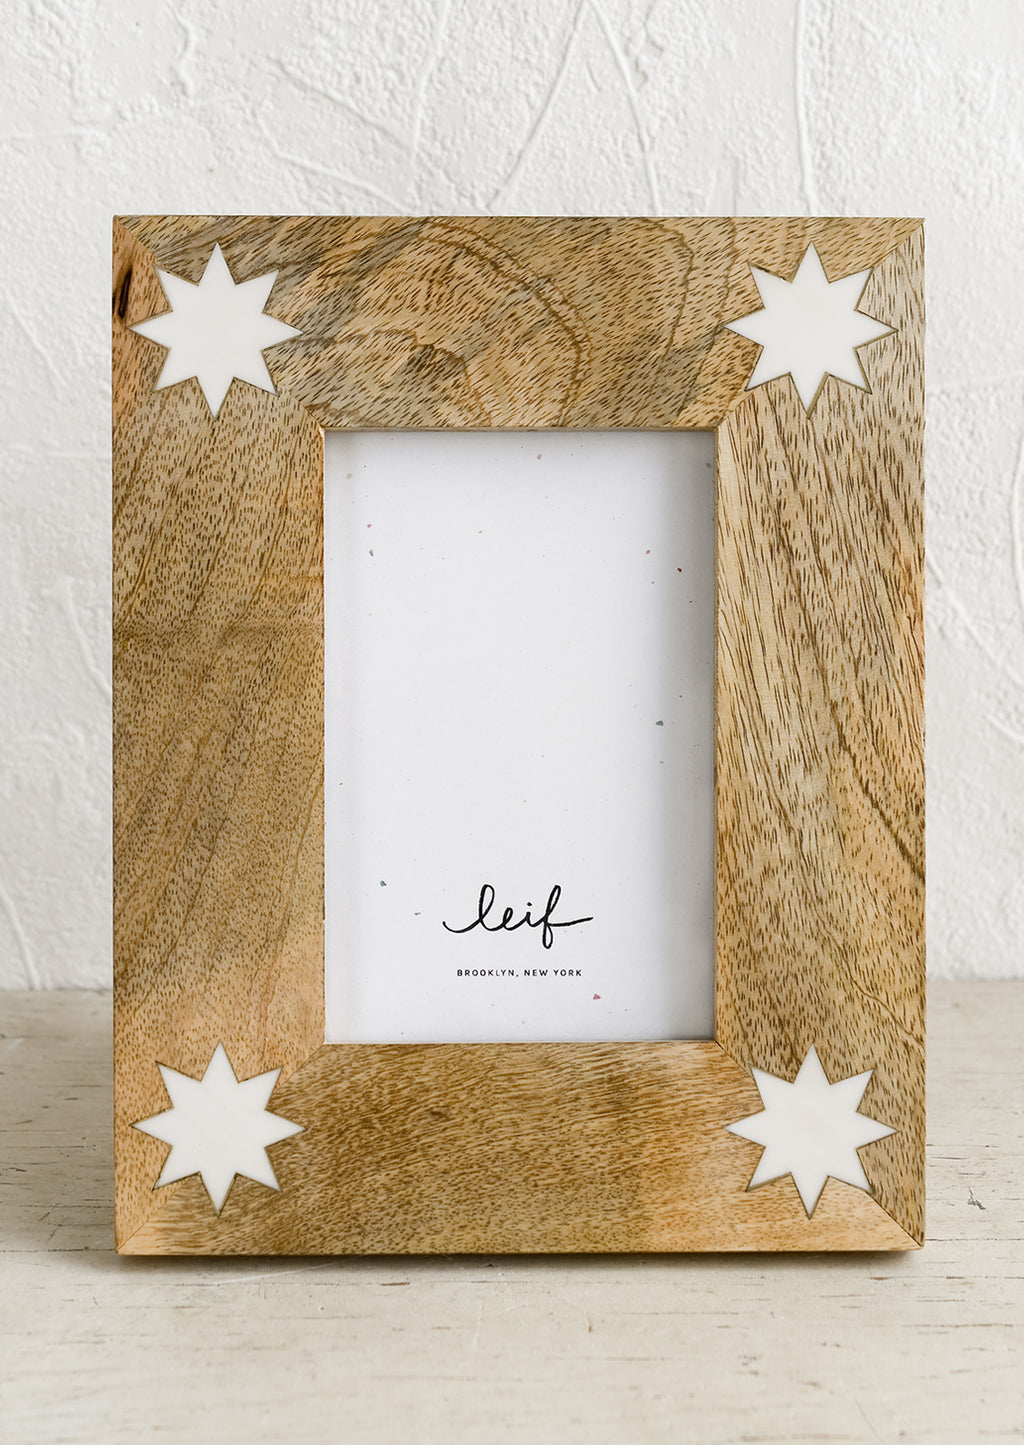 1: A mango wood picture frame with white 8-point stars at corners.